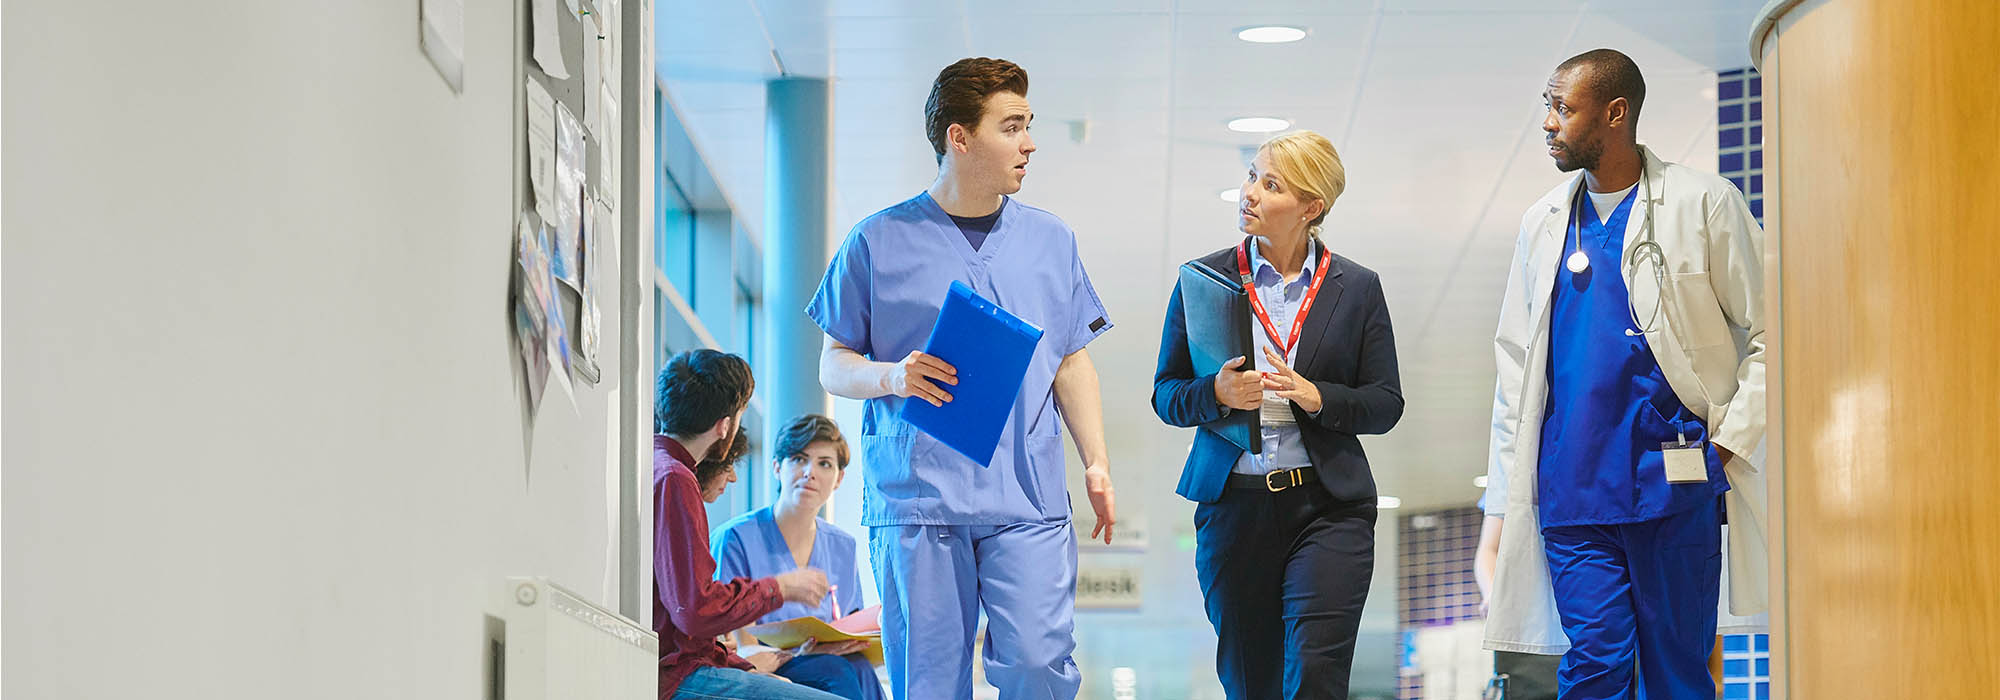 three healthcare professionals walking down a corridor, one is dressed in a smart business suit and the other two are wearing scrubs